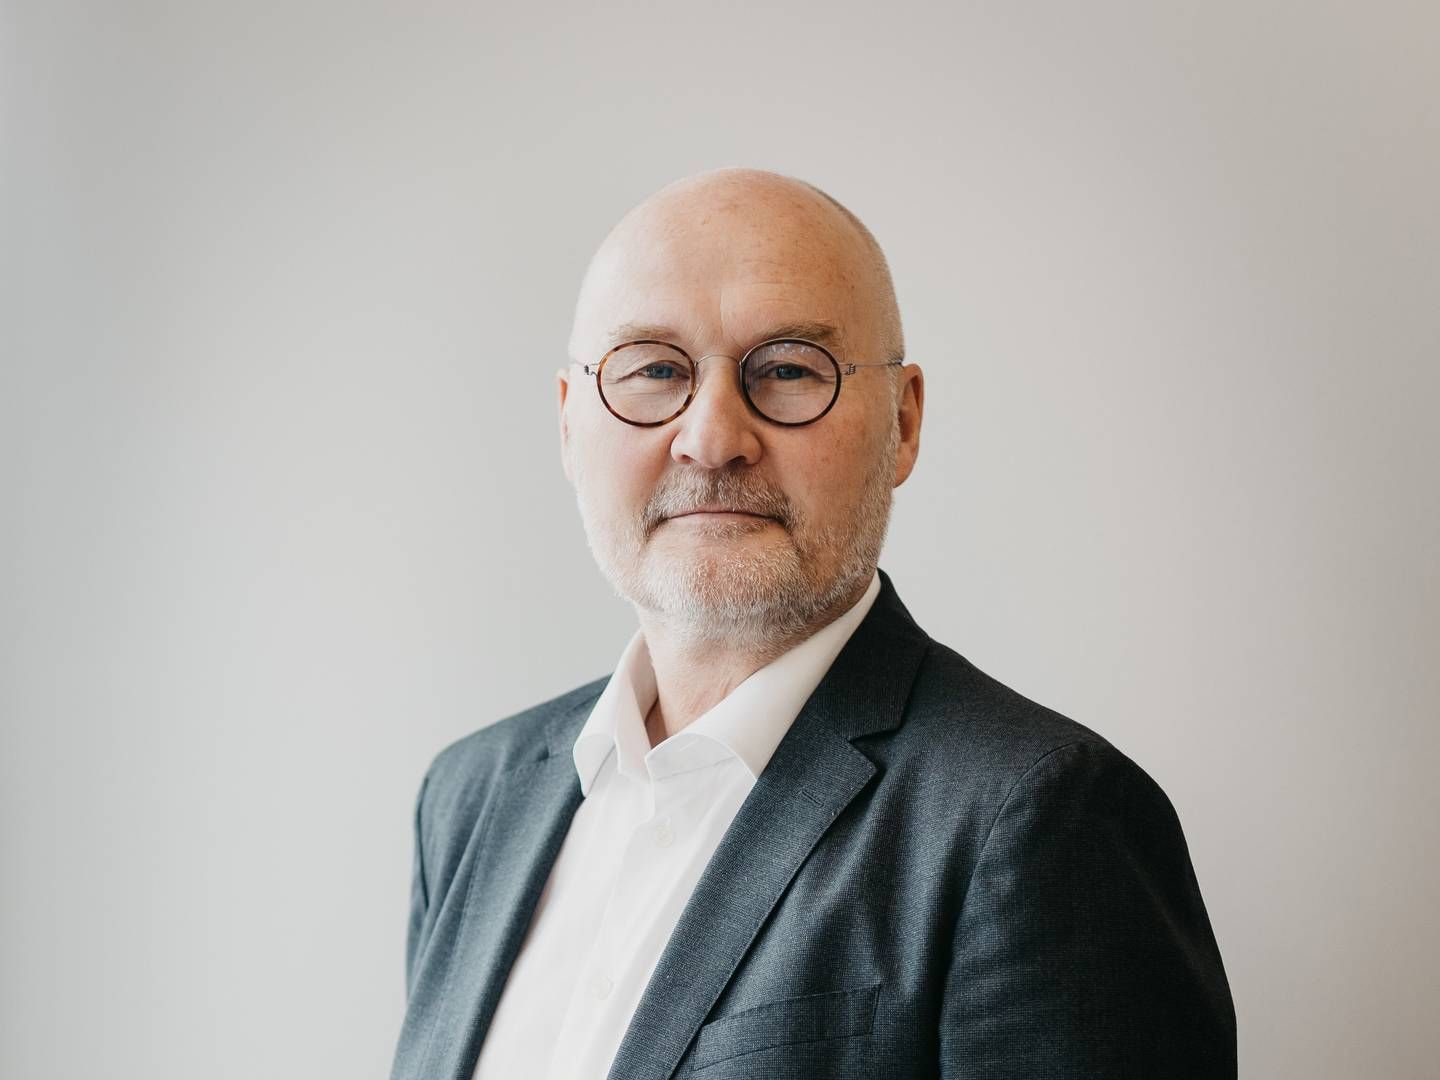 Stricter FSA rules have weakened the competitiveness of Norway's asset management industry, Bernt Zakariassen, CEO of the Norwegian Fund and Asset Management Association (VFF) says. | Photo: Irene Sandved Lunde / VFF